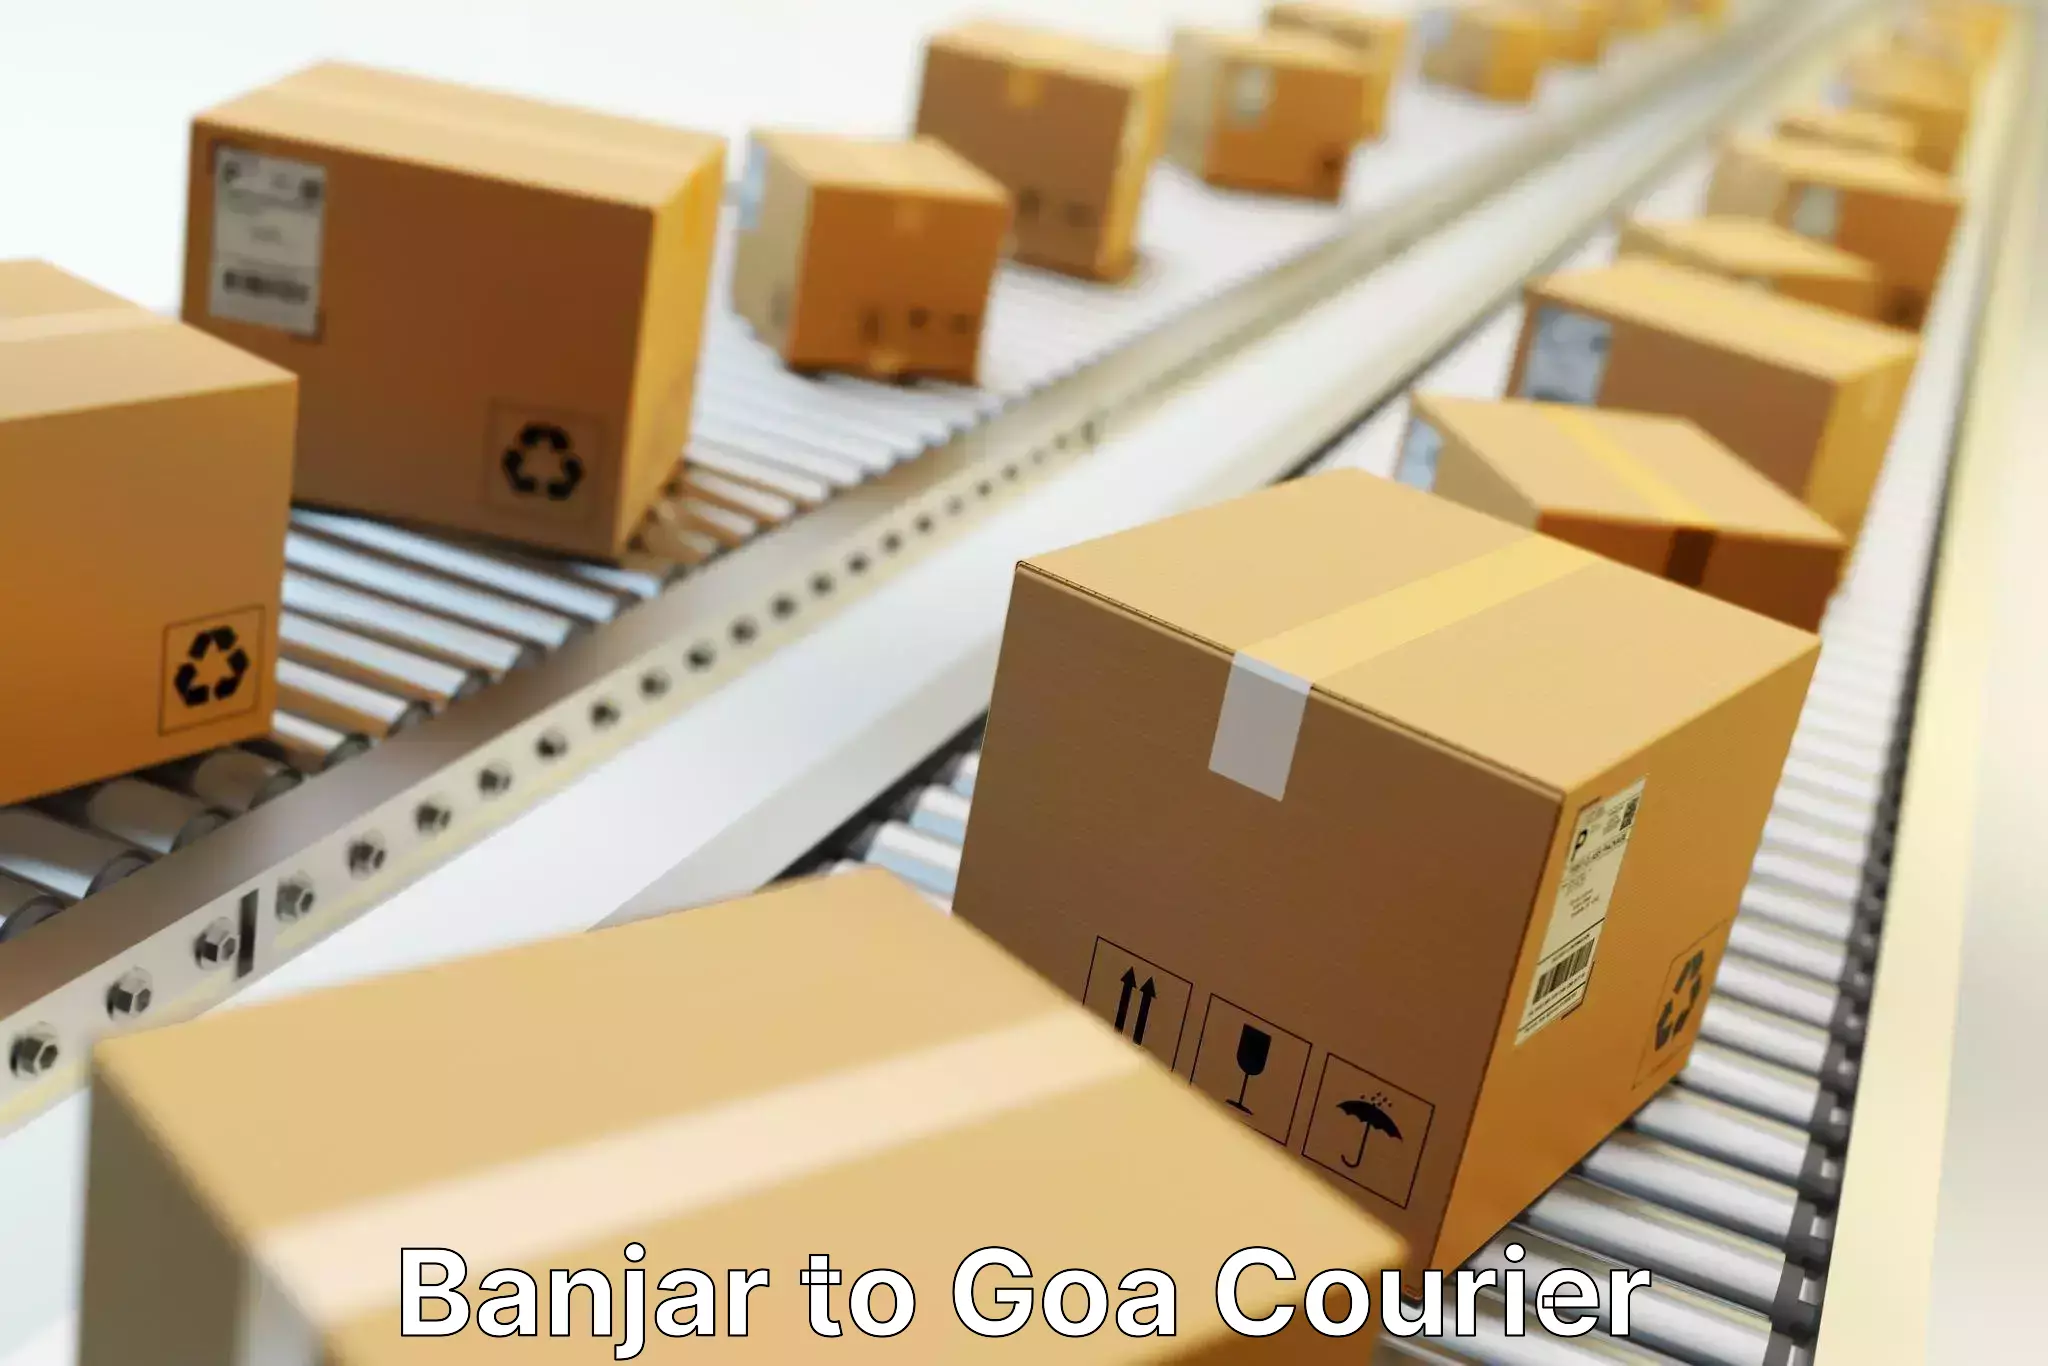 Cash on delivery service Banjar to Goa